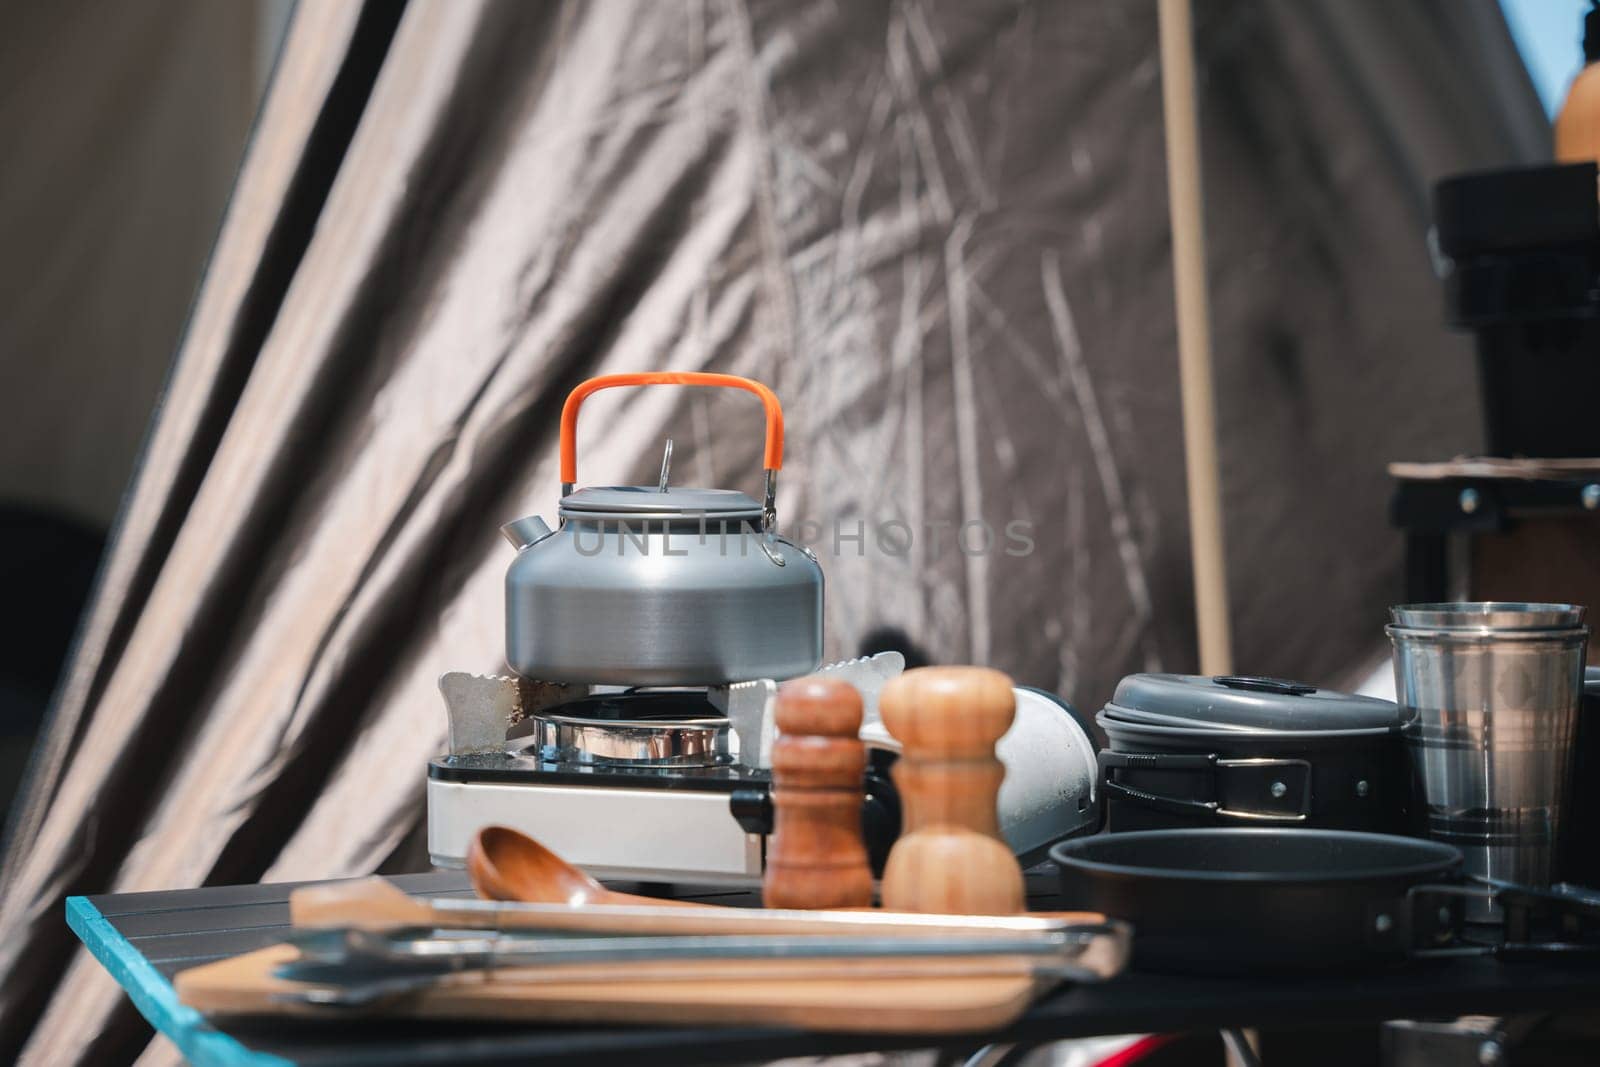 Campsite perfection, kettle, pot, pan, gas stove, flashlight, and camera neatly arranged at the front of the tent. Experience the joy of camping amidst nature's beauty.